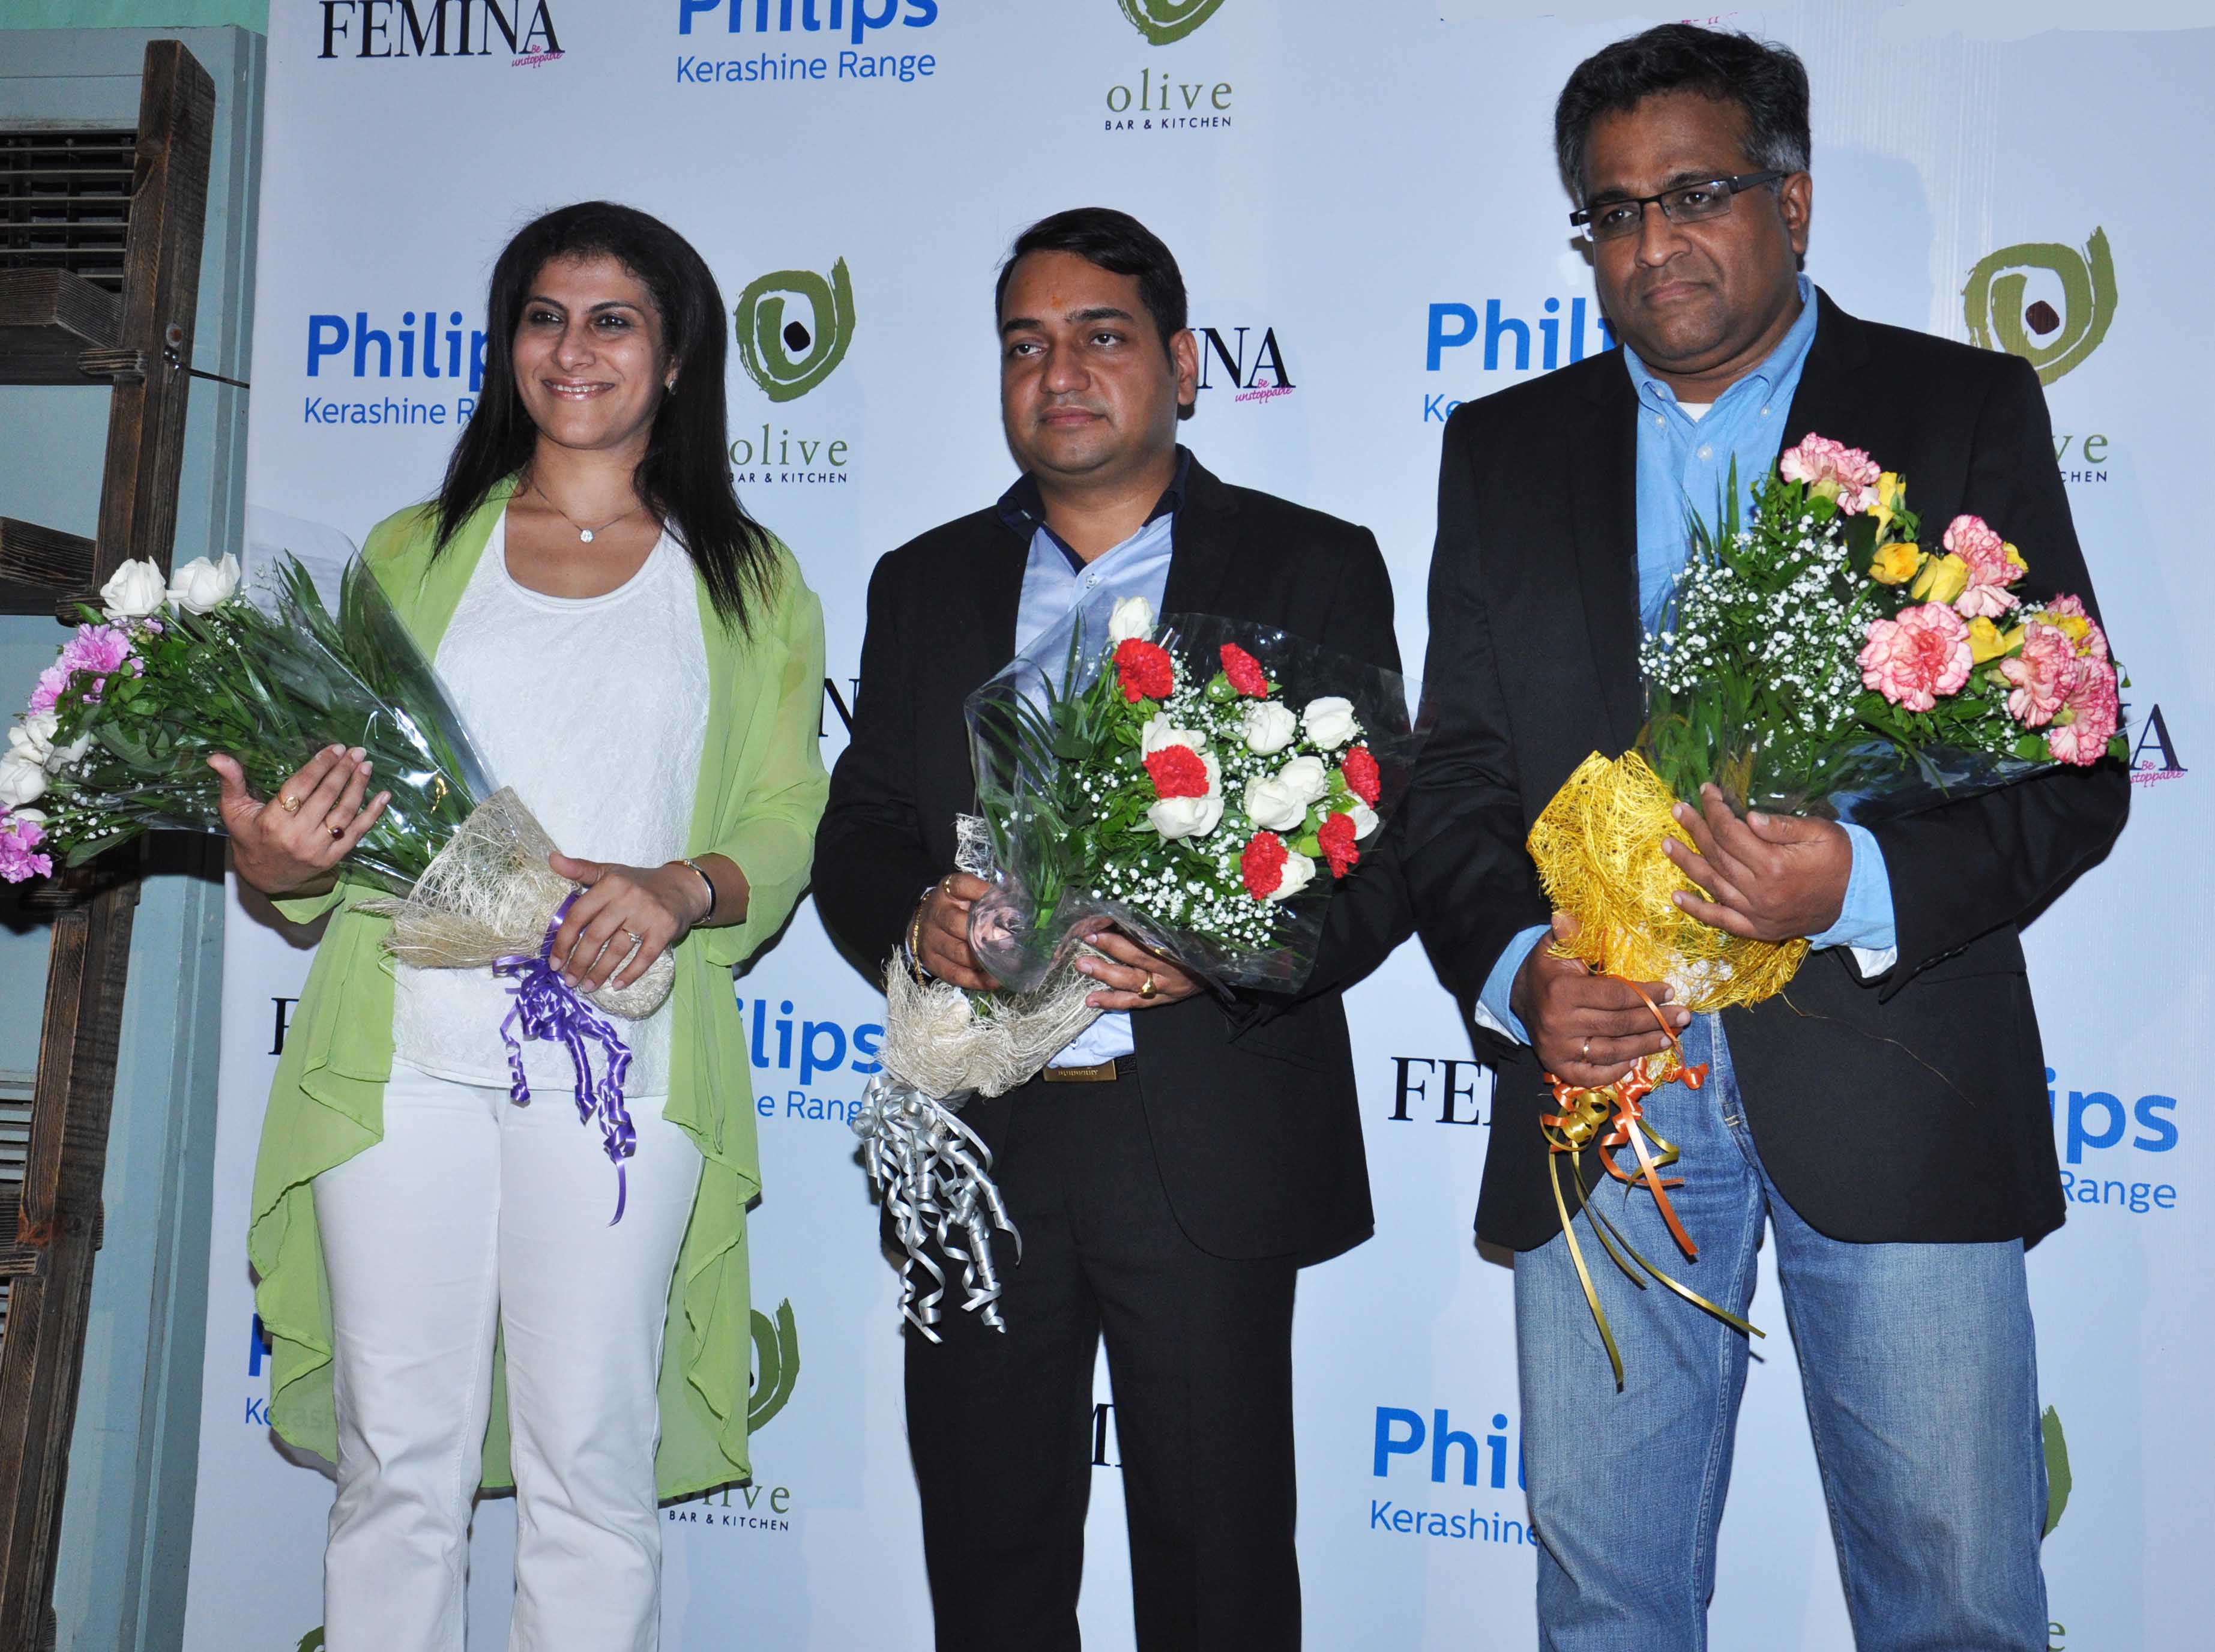 Mr. A D A Ratnam (President, Consumer Lifestyle, Philips India) with team at the cover launch of Feminaas 55th Anniversary issue at Guppy by Olive.